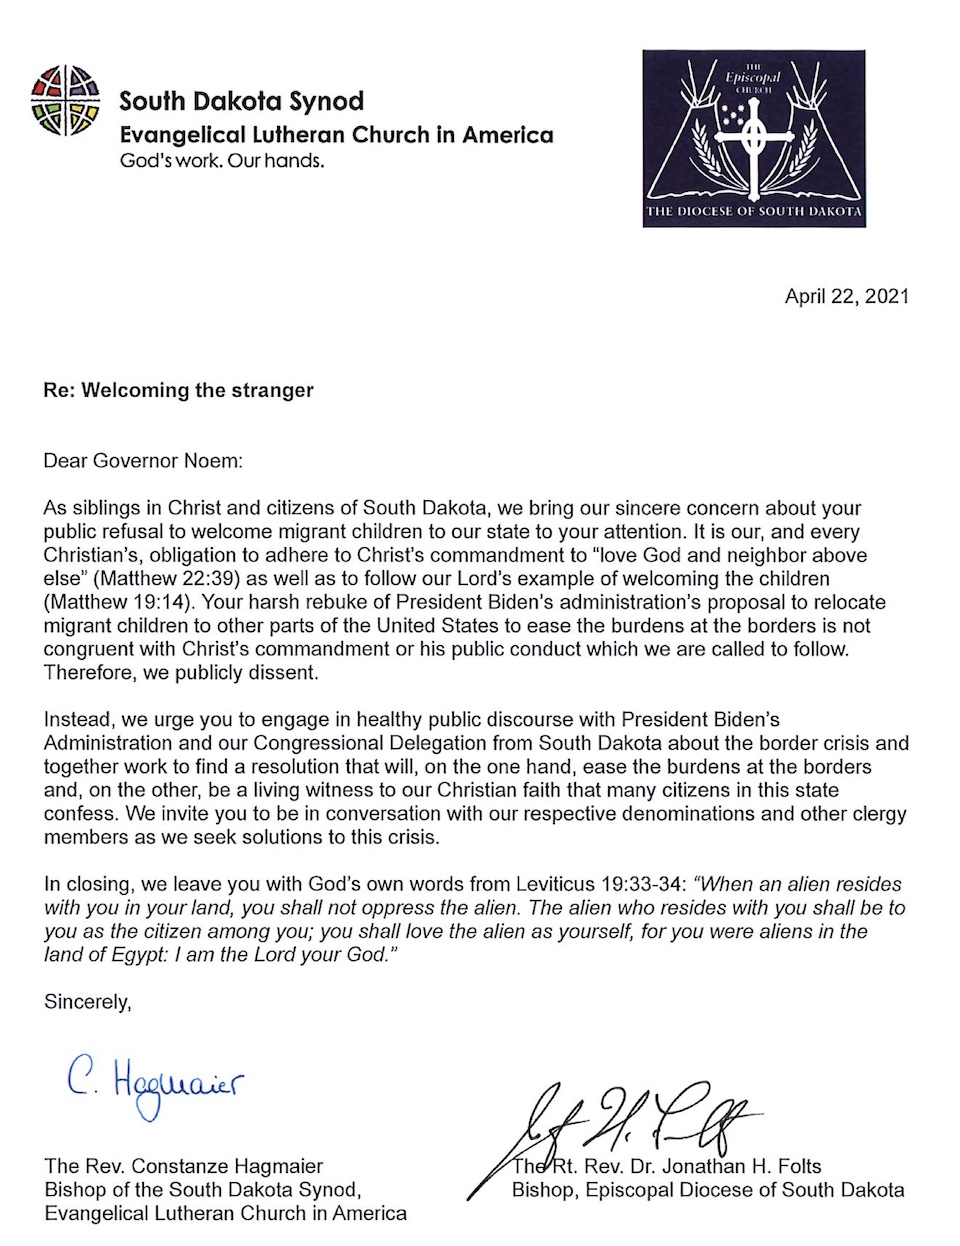 Rev. Constanze Hagmeier, Bishop of the South Dakota Synod of the Evangelical Lutheran Church in America, and Rev. Jonathan H. Folts, Bishop of the Episcopal Diocese of South Dakota, open letter to Gov. Kristi Noem, 2021.04.22.